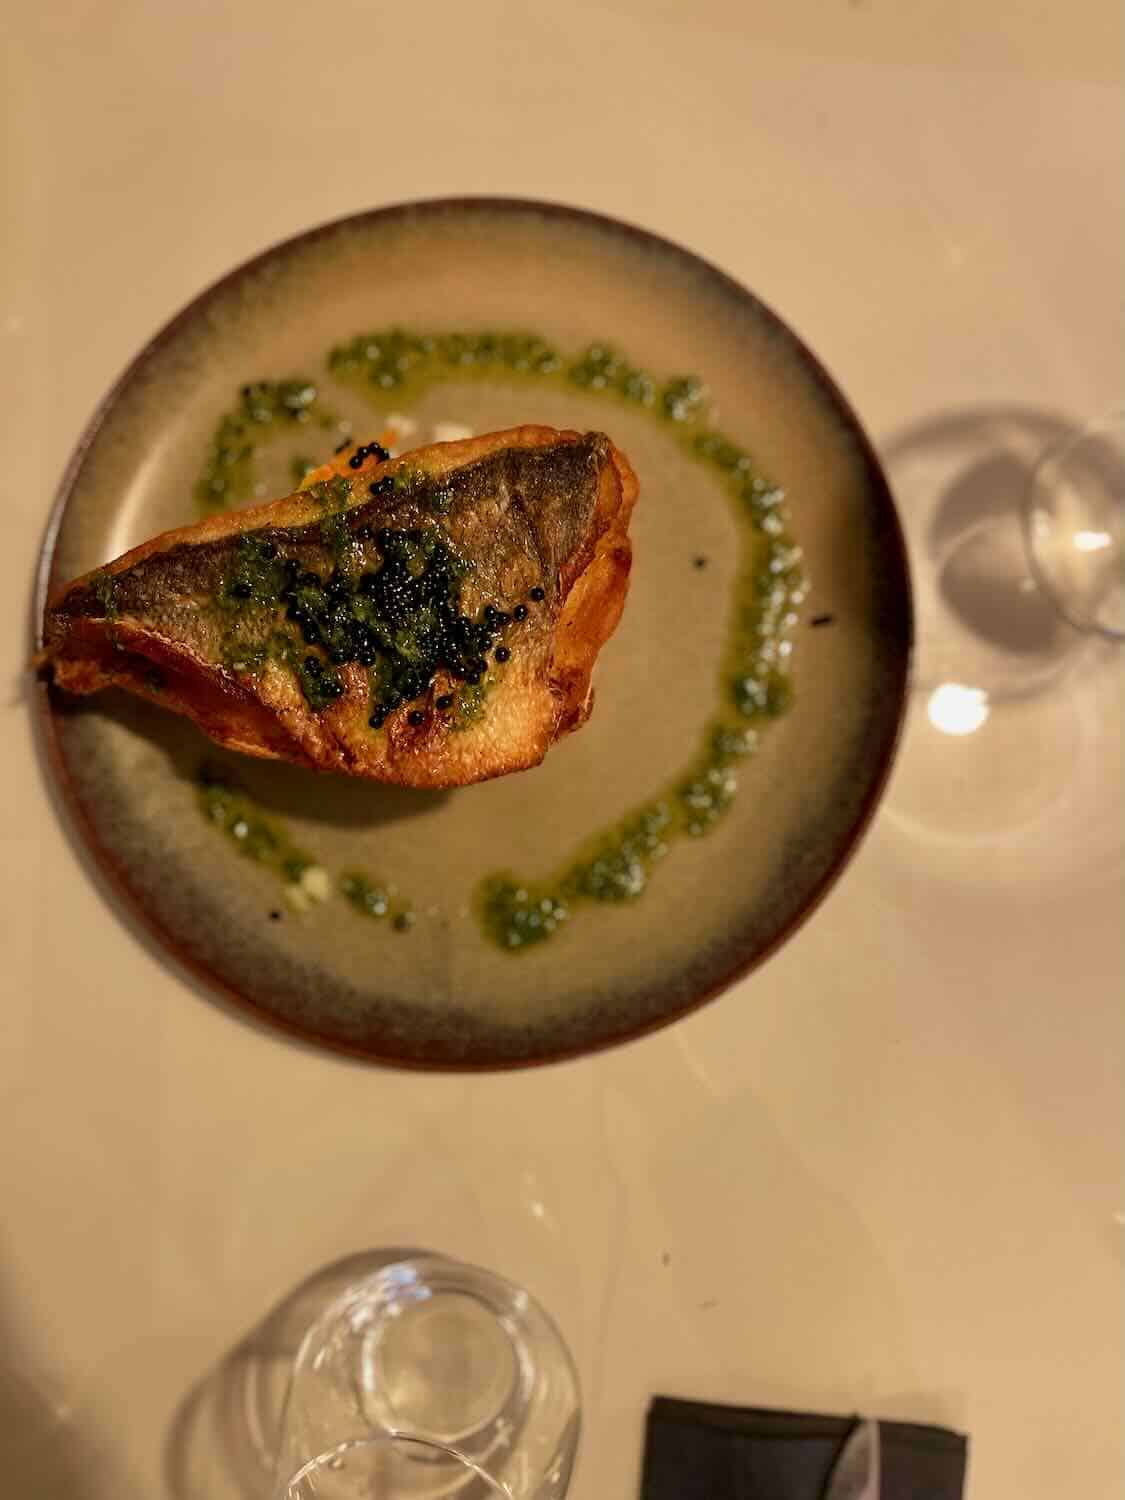 Elegant presentation of a grilled fish fillet with a vibrant green herb sauce, artistically plated on a ceramic dish, ready to be enjoyed with a glass of wine at a restaurant in Faro.